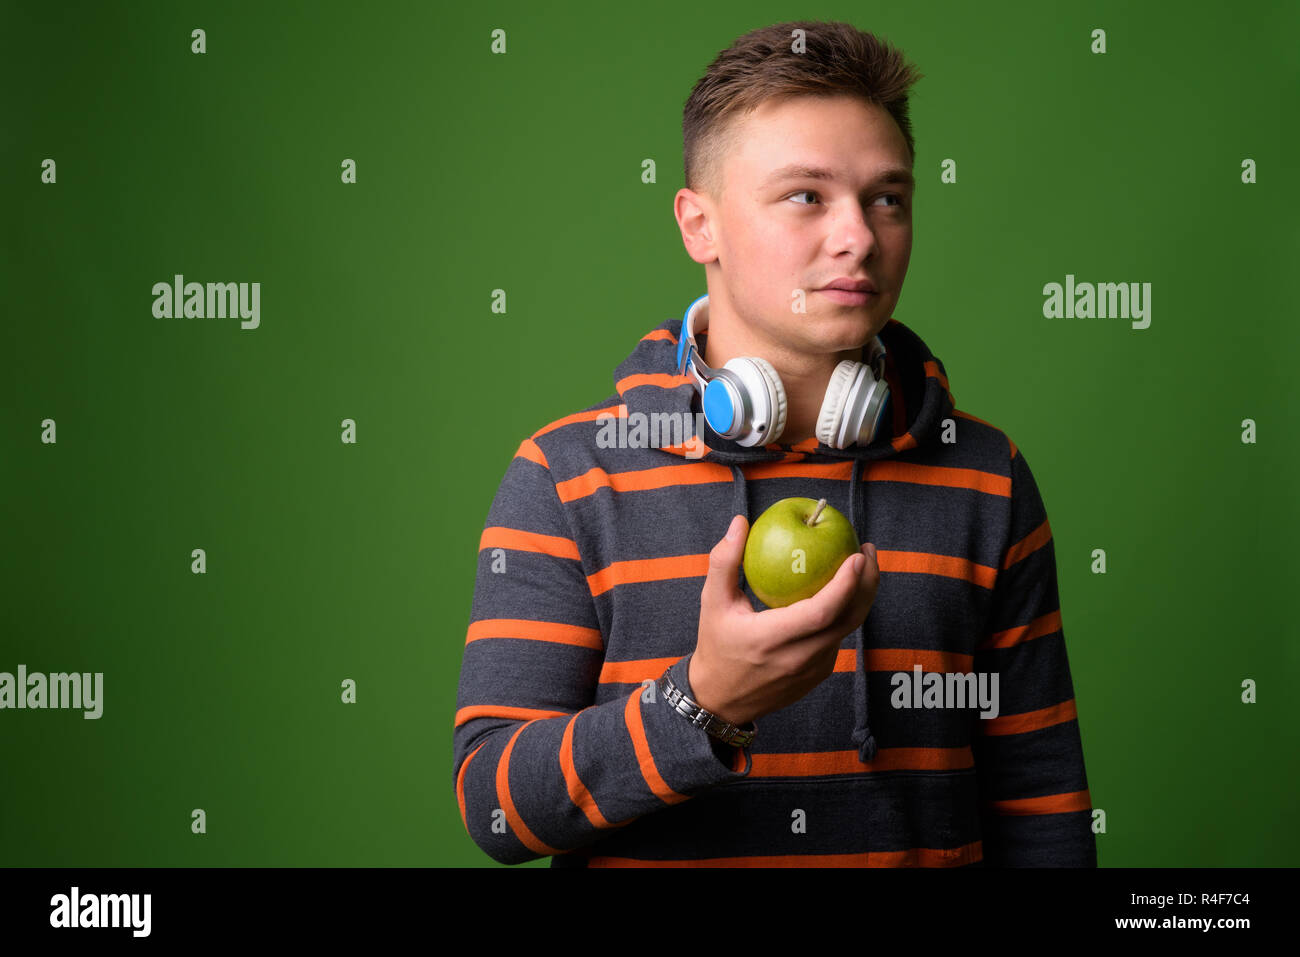 Studio shot of young handsome man against green background Stock Photo